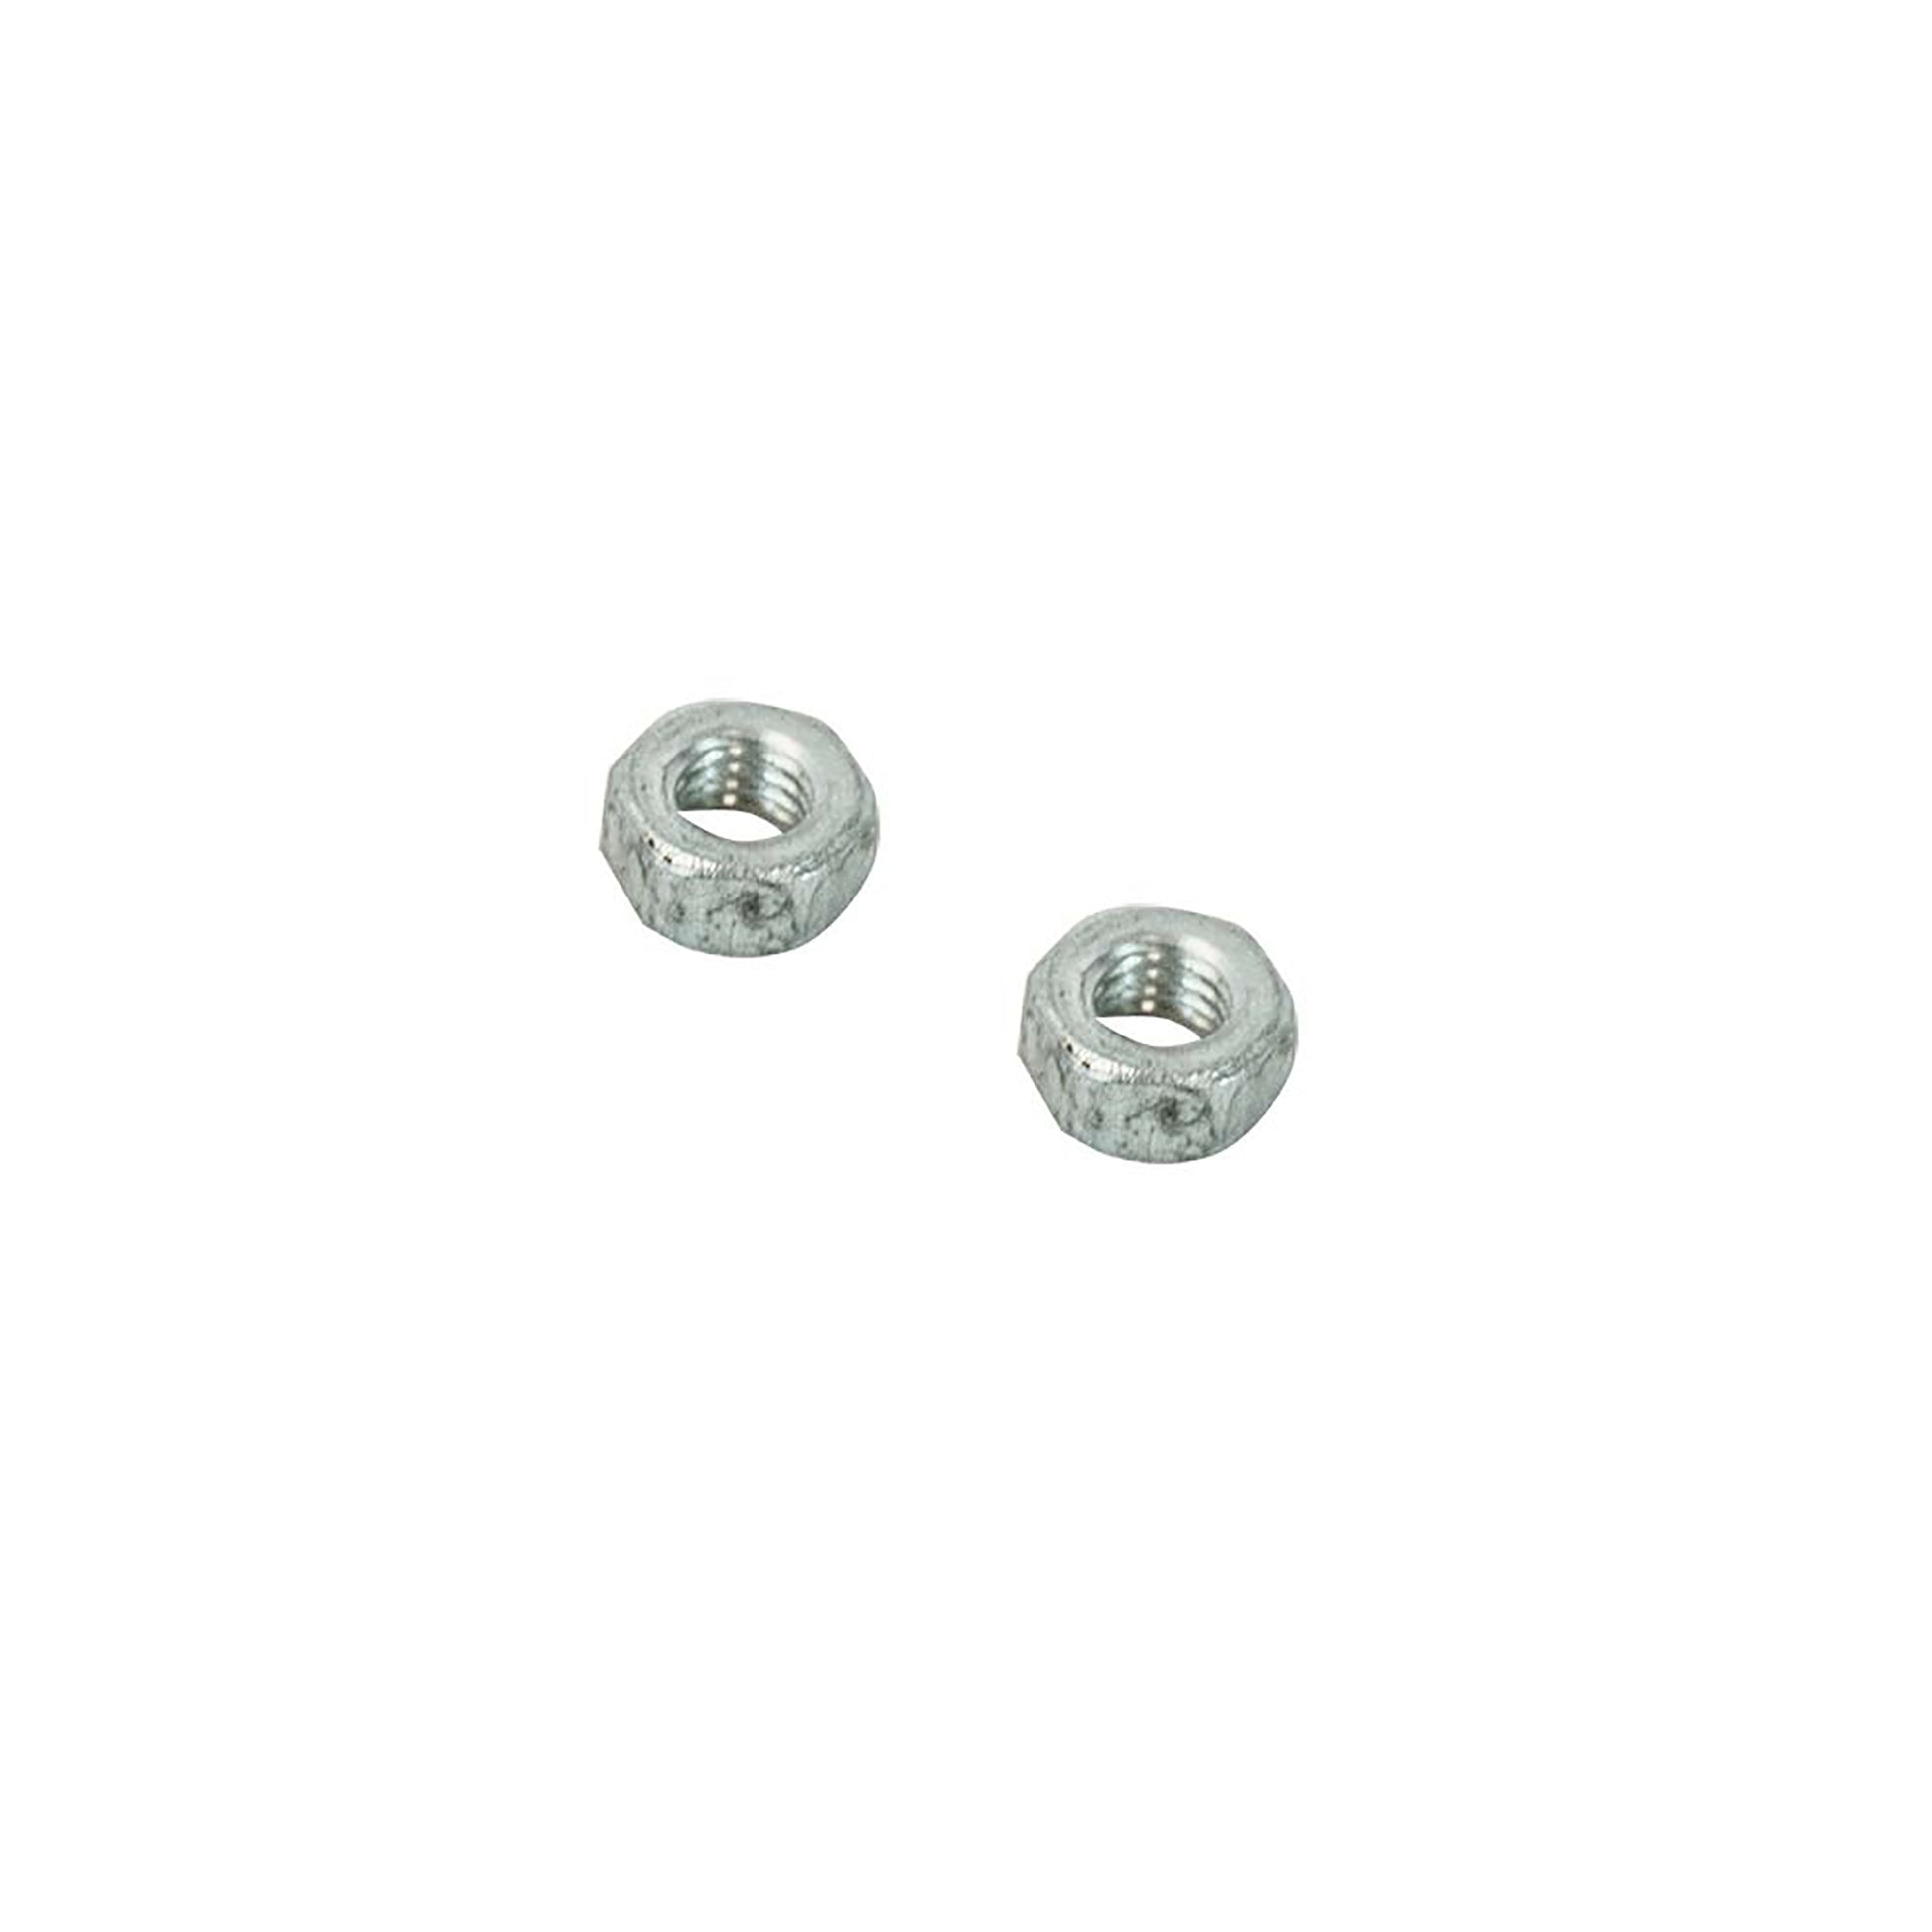 Nozzle Screw Nuts for BR-252A Inflatable Blower